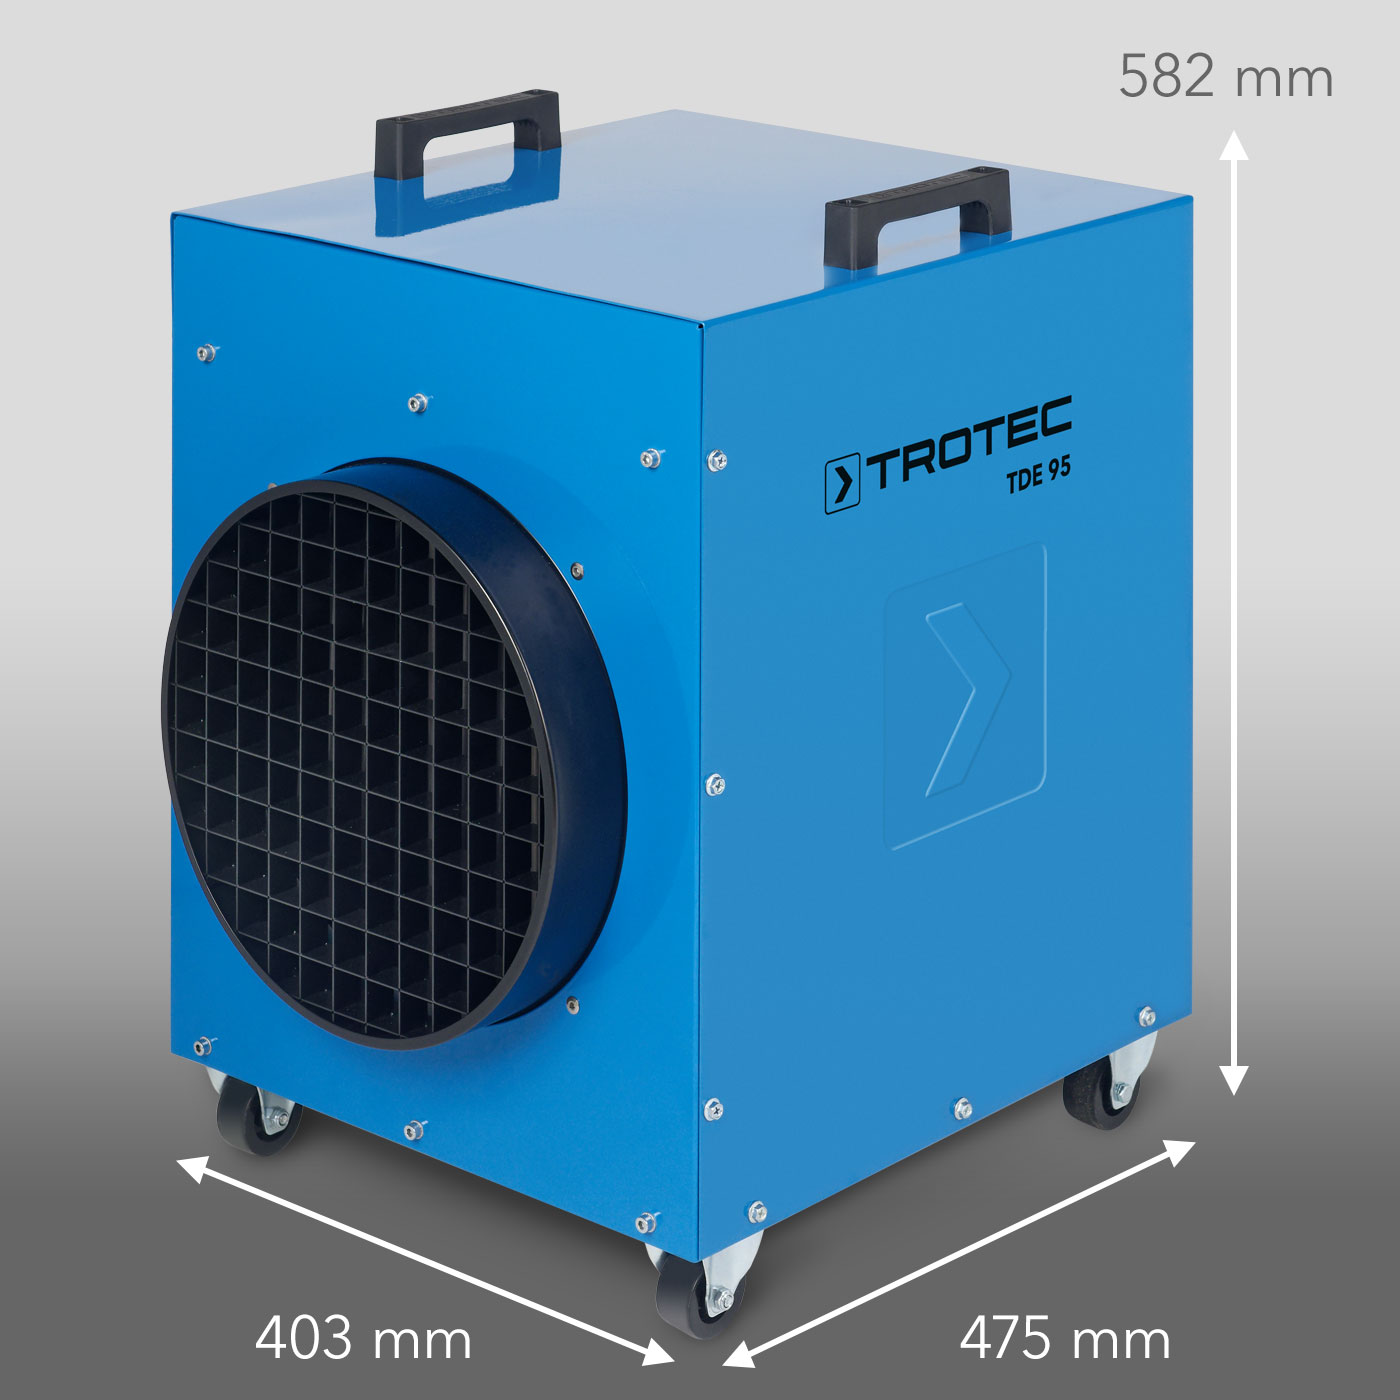 Robust and designed for the use on construction sites – Trotec’s electric heater TDE 95